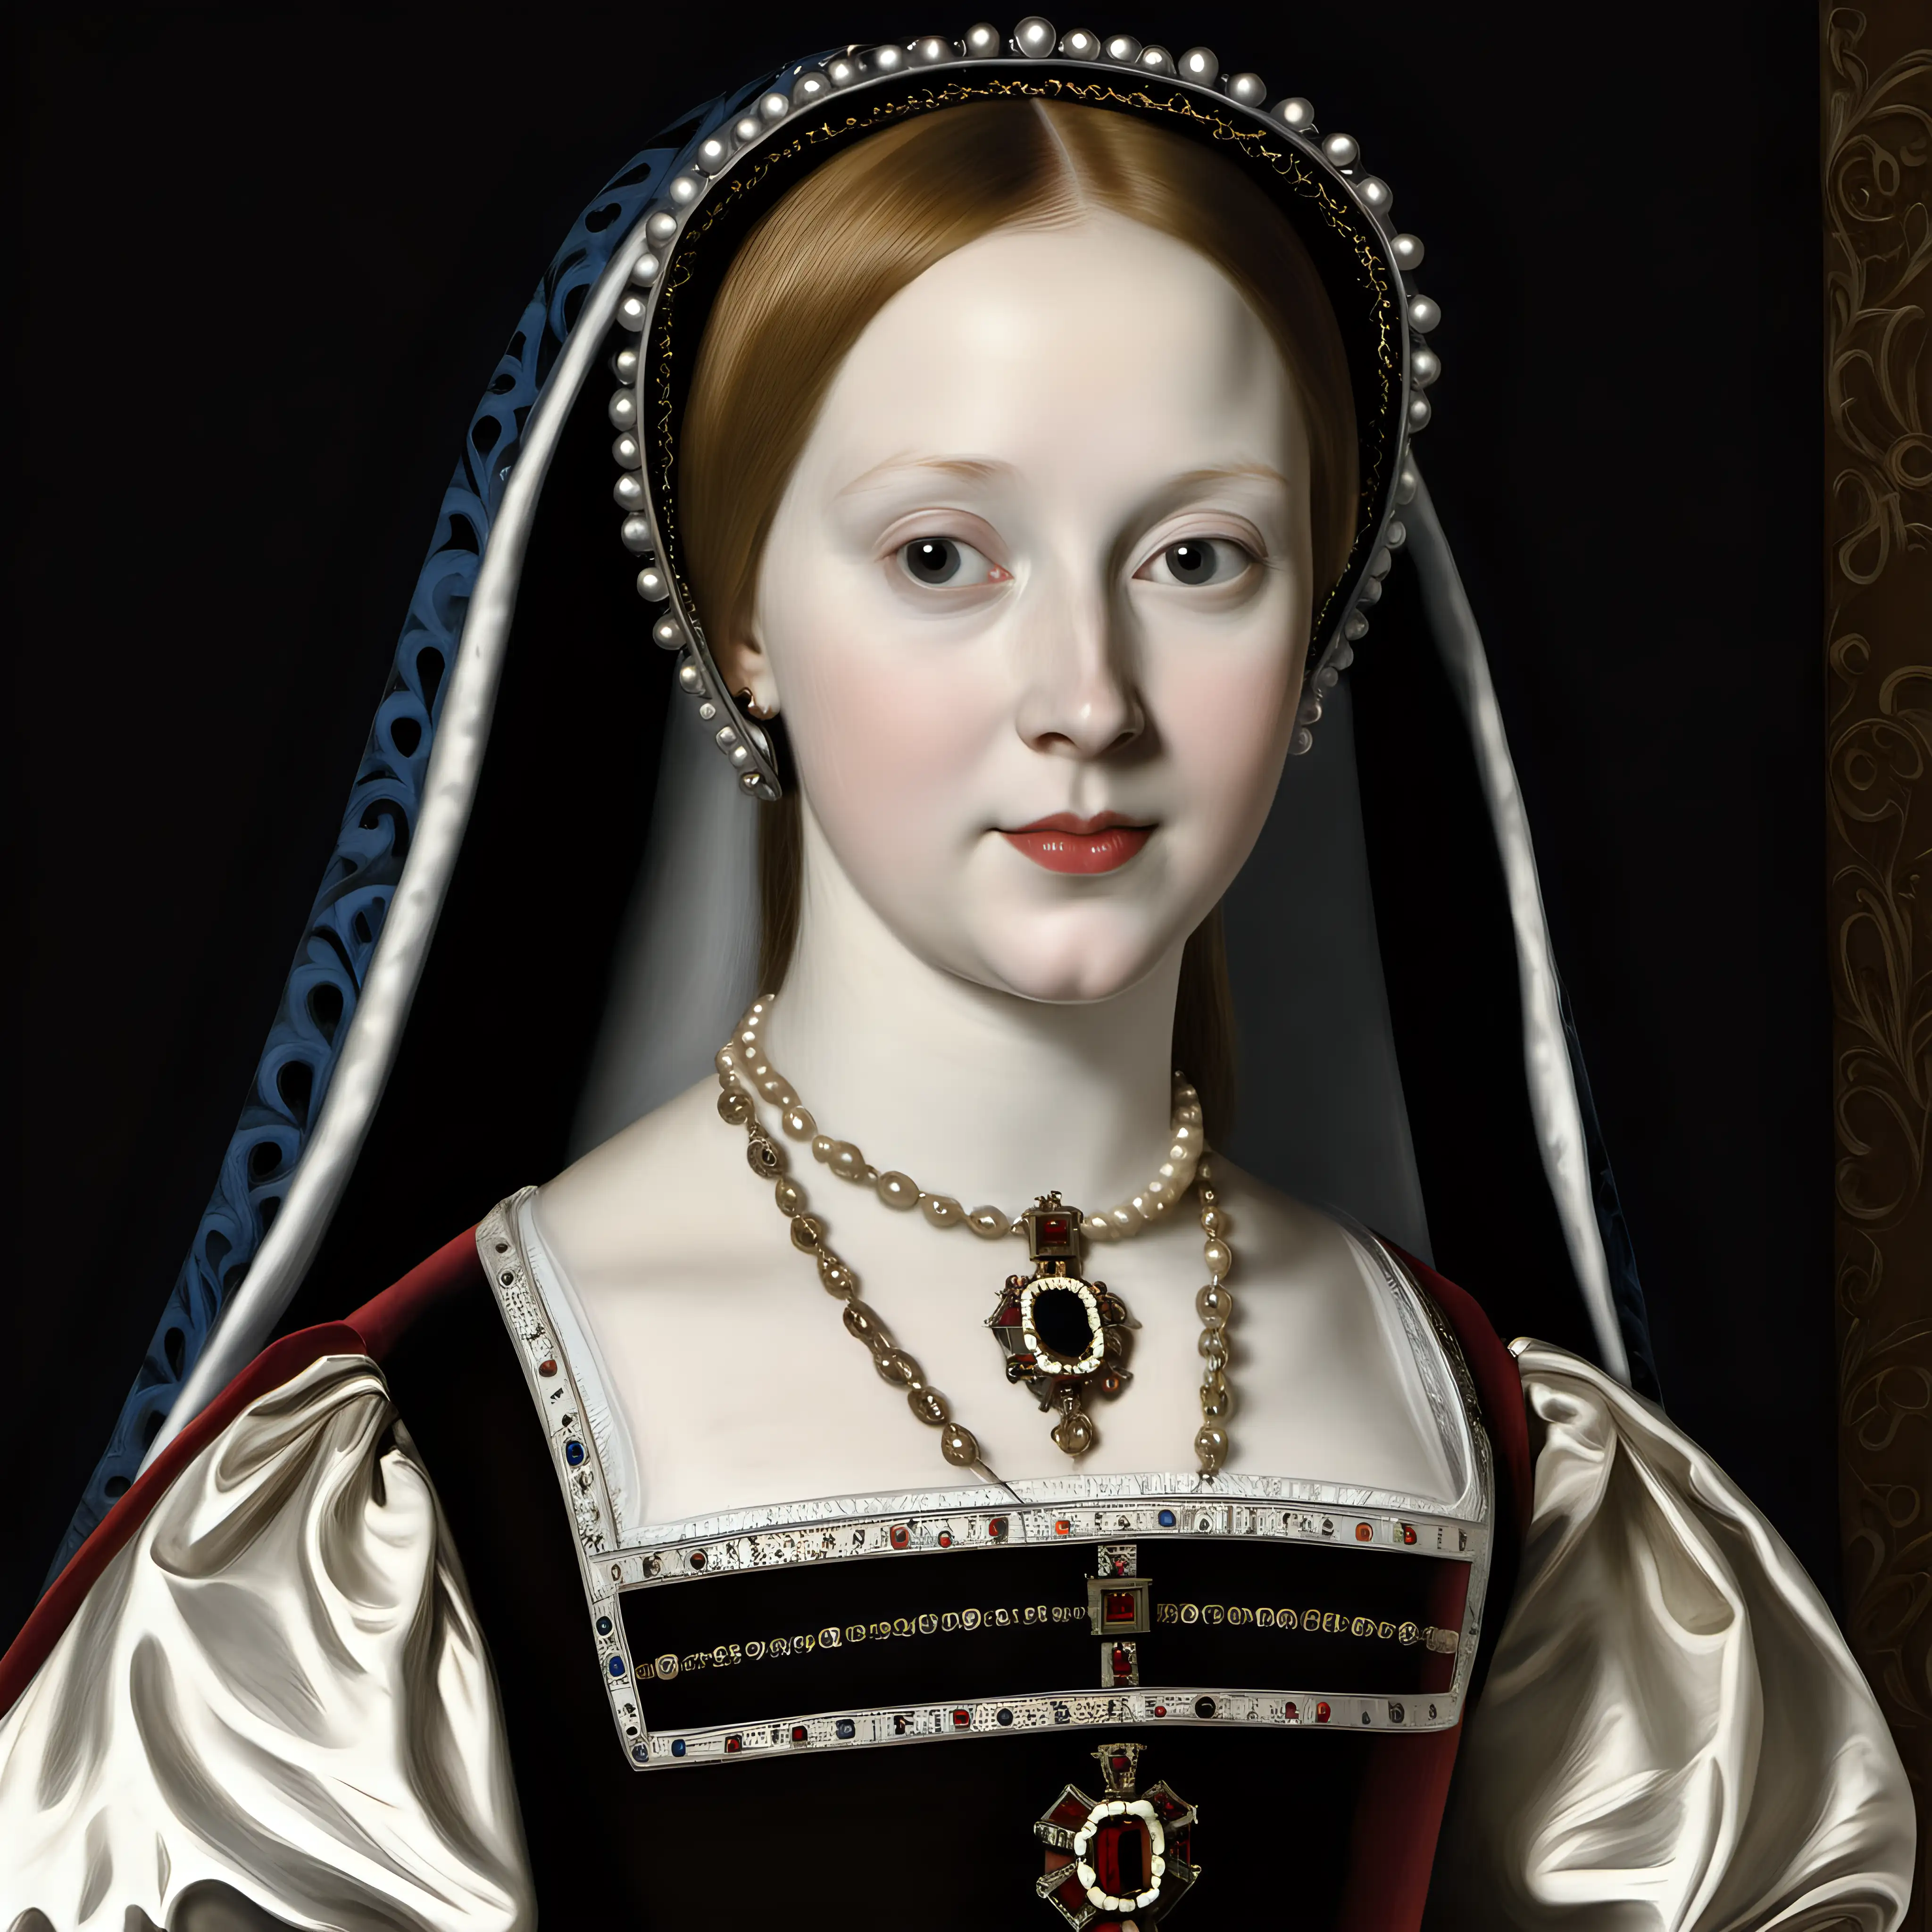 Mary Tudor Catalinas Crownless Daughter in Youthful Splendor